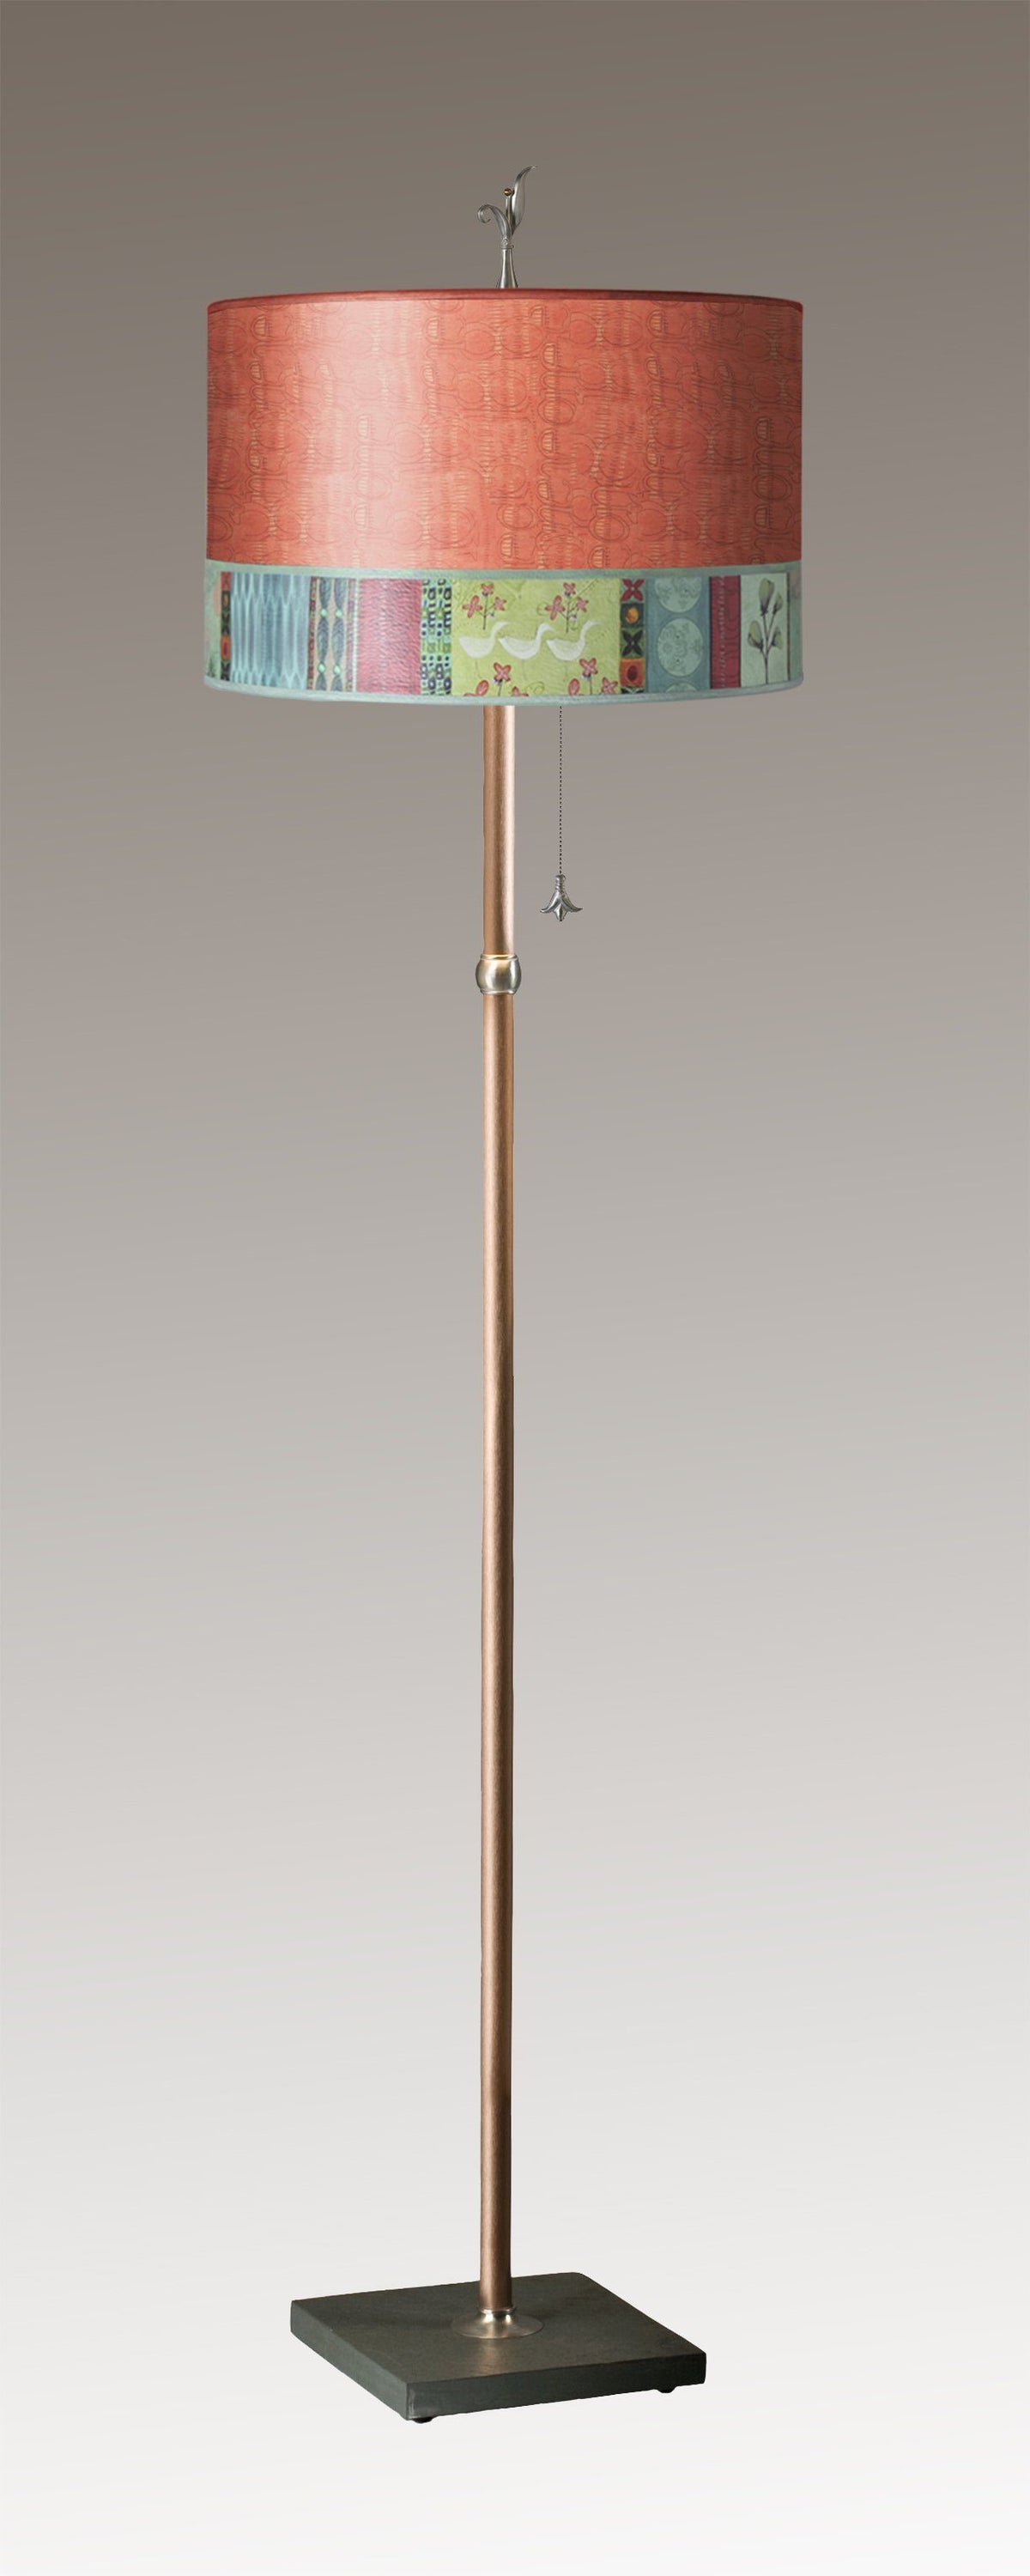 Copper Floor Lamp with Large Drum Lampshade in Melody in Coral